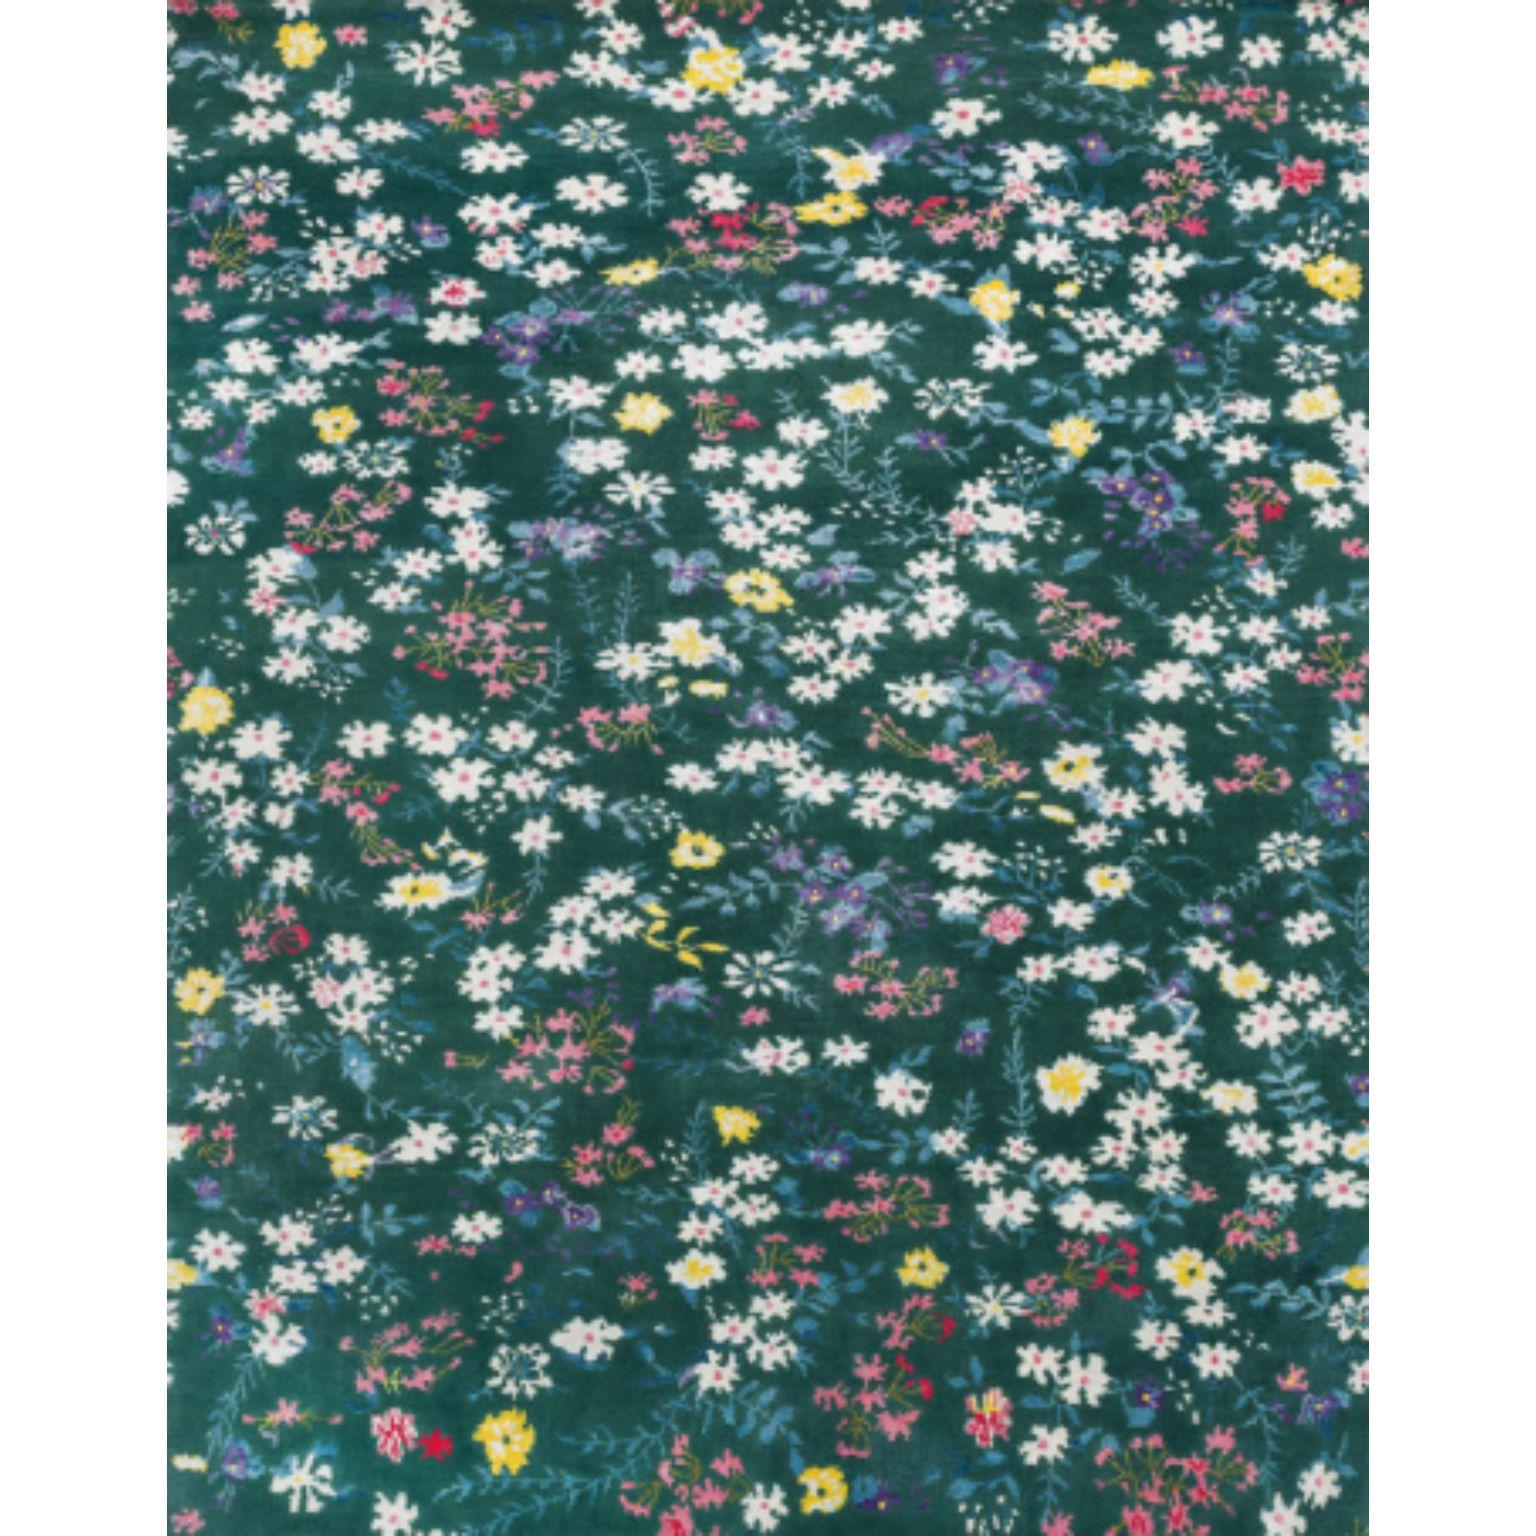 CHLOE' Rug by Illulian
Dimensions: D300 x H200 cm 
Materials: Wool 50%,  Silk 50%
Variations available and prices may vary according to materials and sizes. Please contact us.

Illulian, historic and prestigious rug company brand, internationally